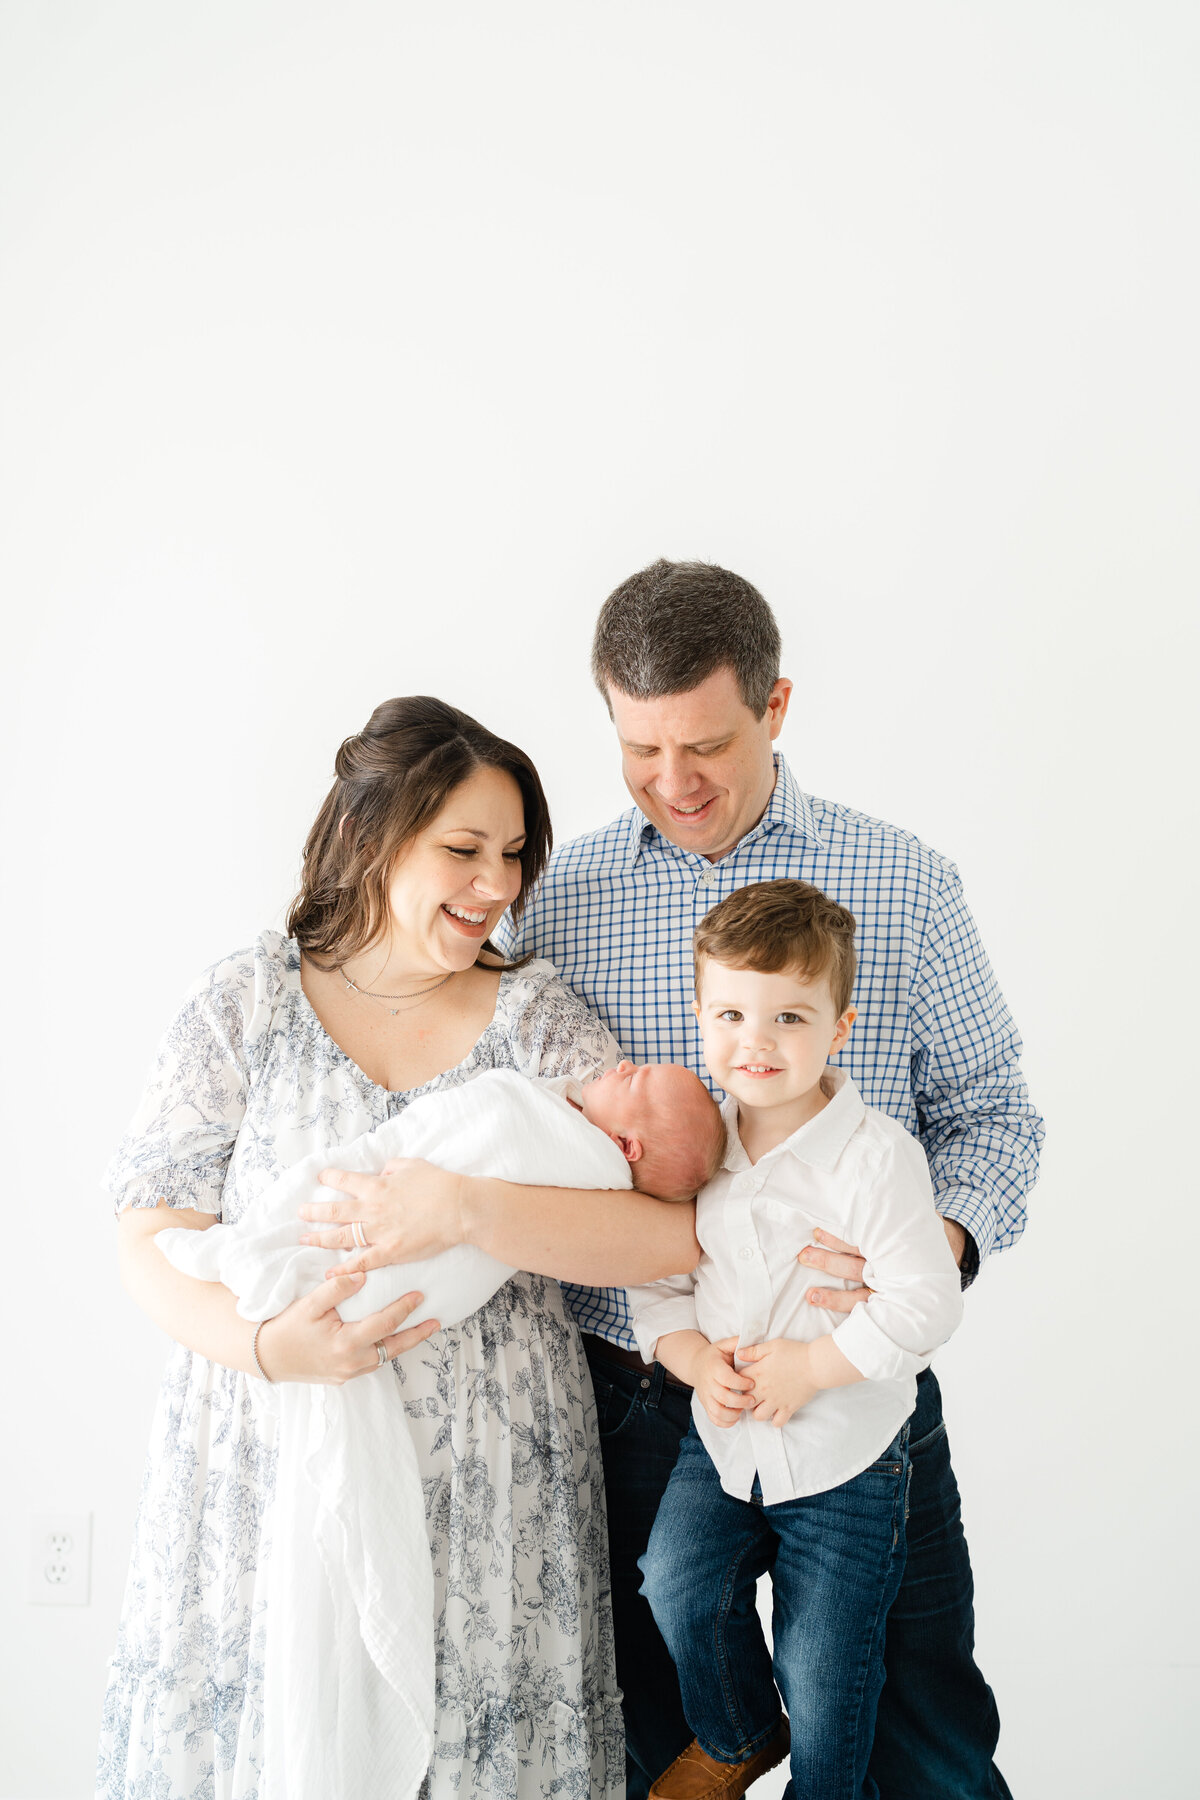 Lindsey Powell is a Newborn Photographer based in Marietta Georgia serving Atlanta and Beyond